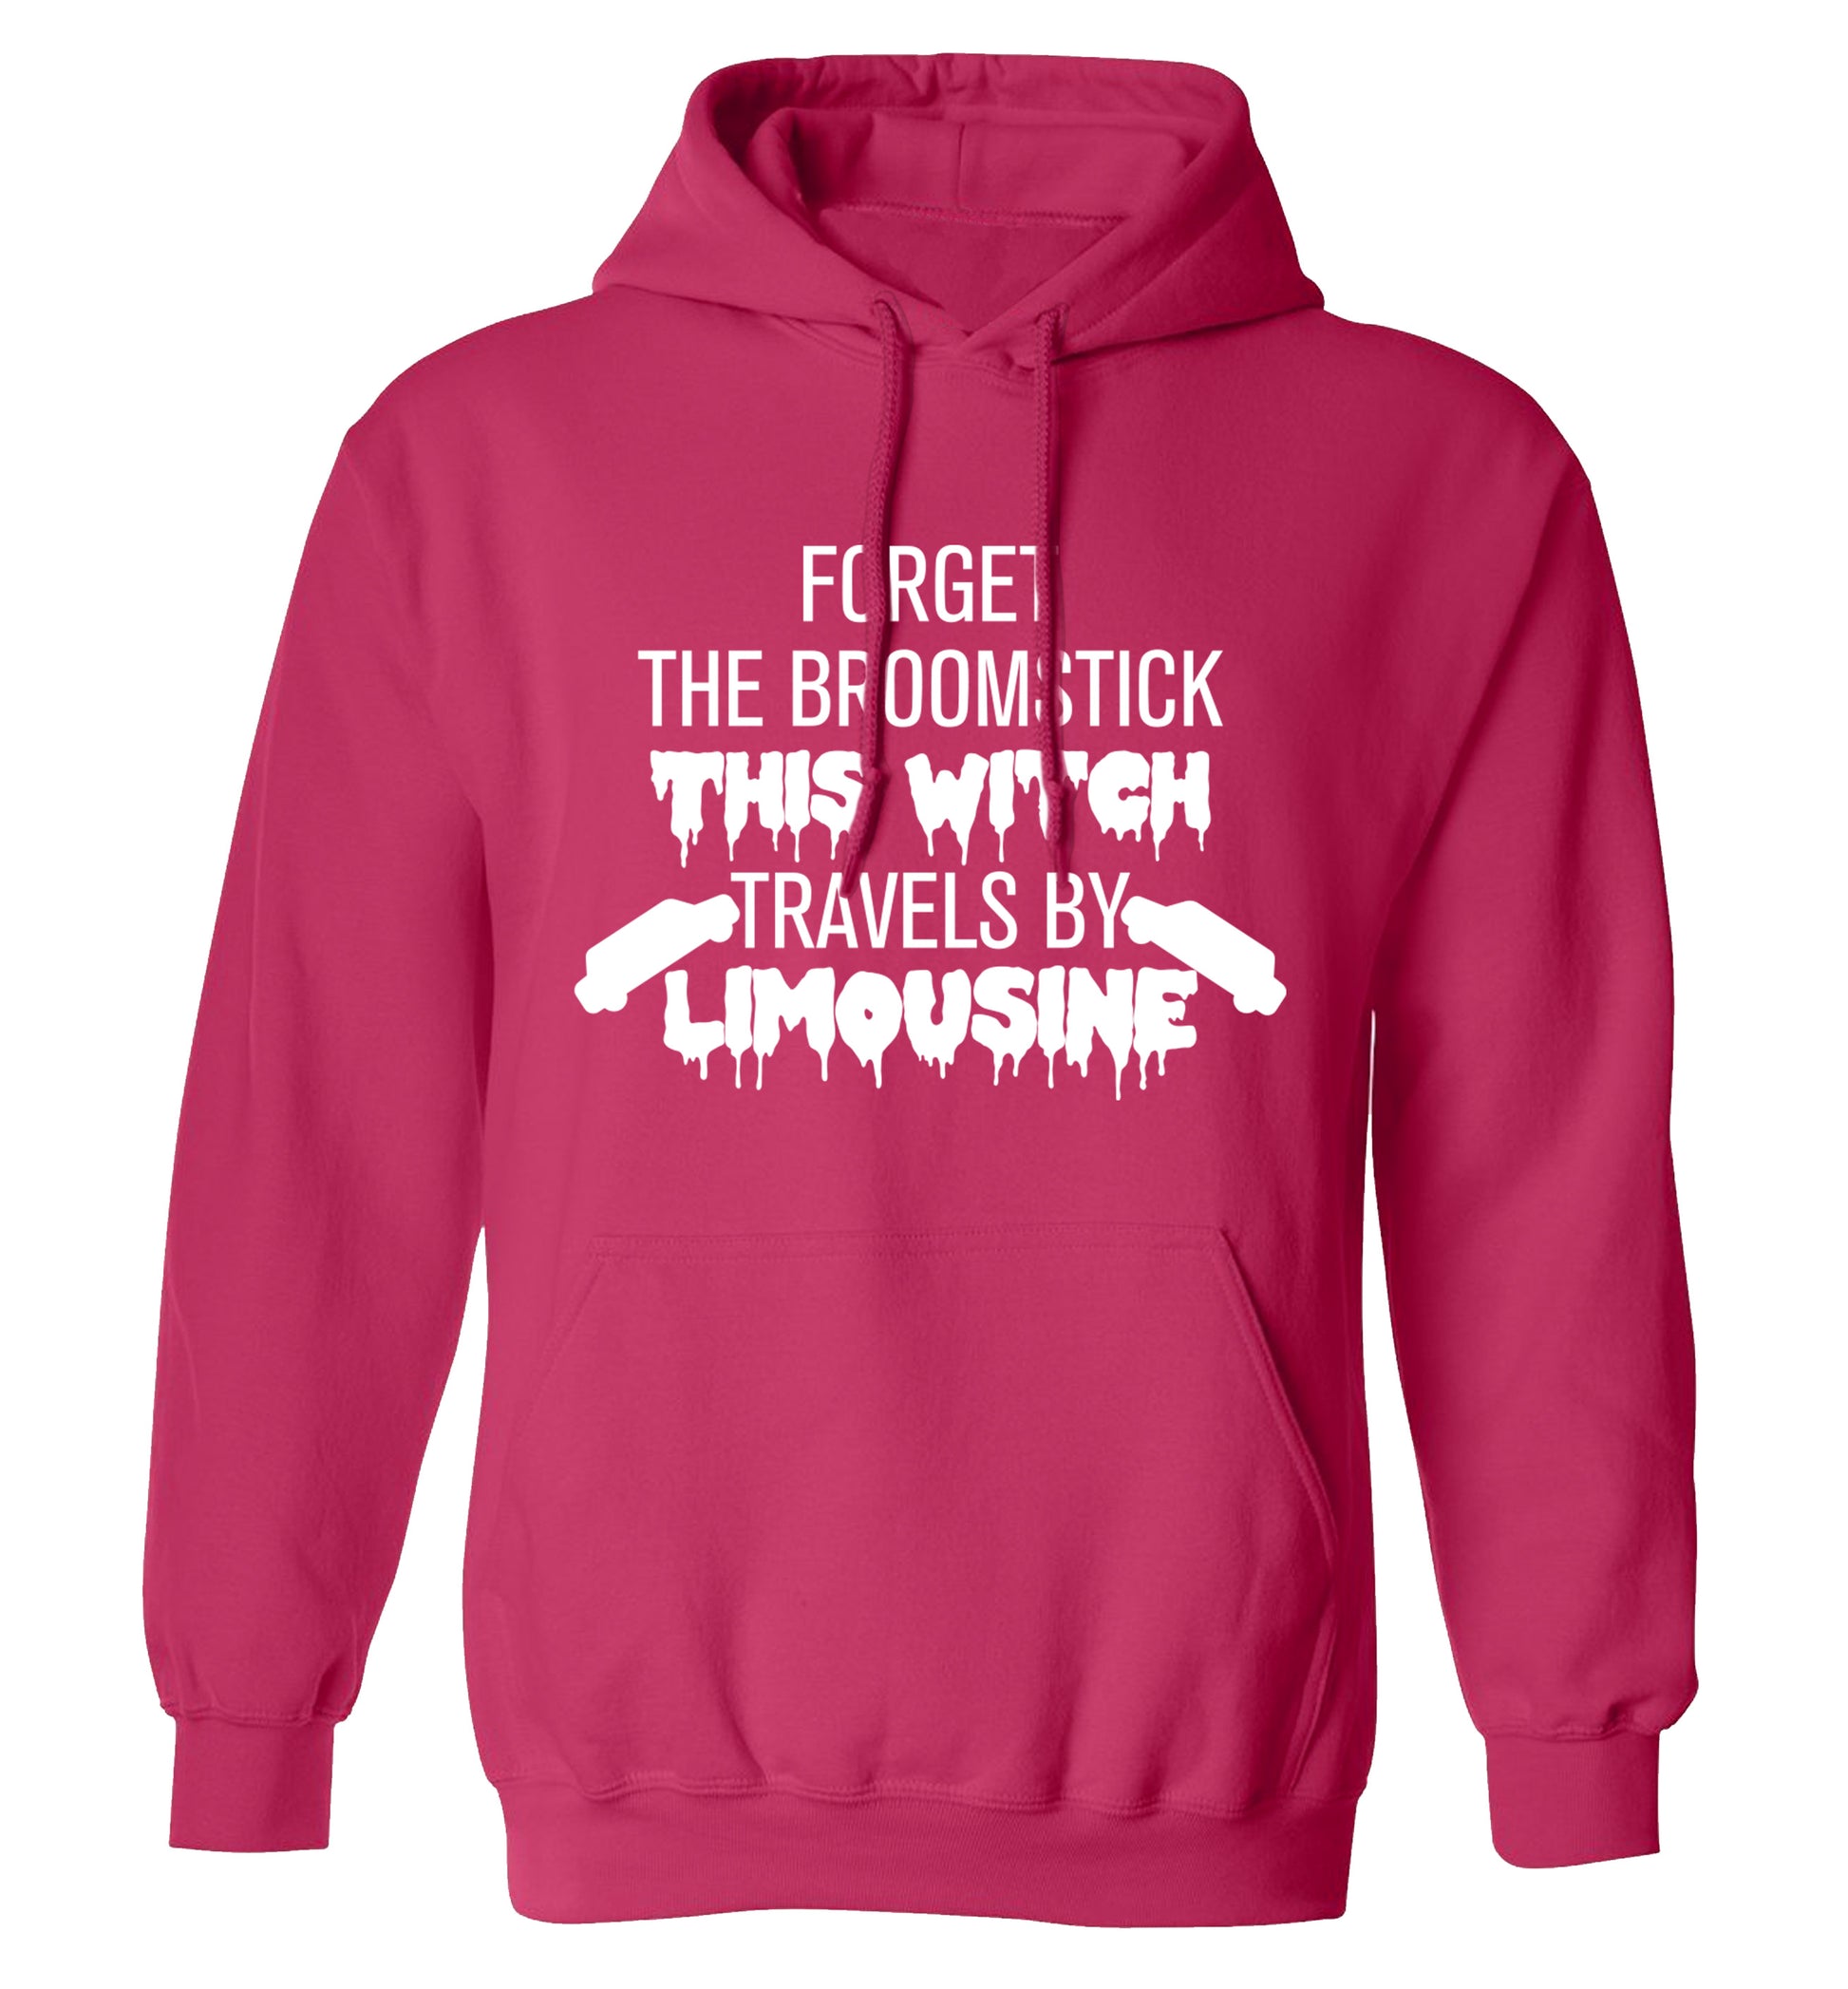 Forget the broomstick this witch travels by limousine adults unisexpink hoodie 2XL